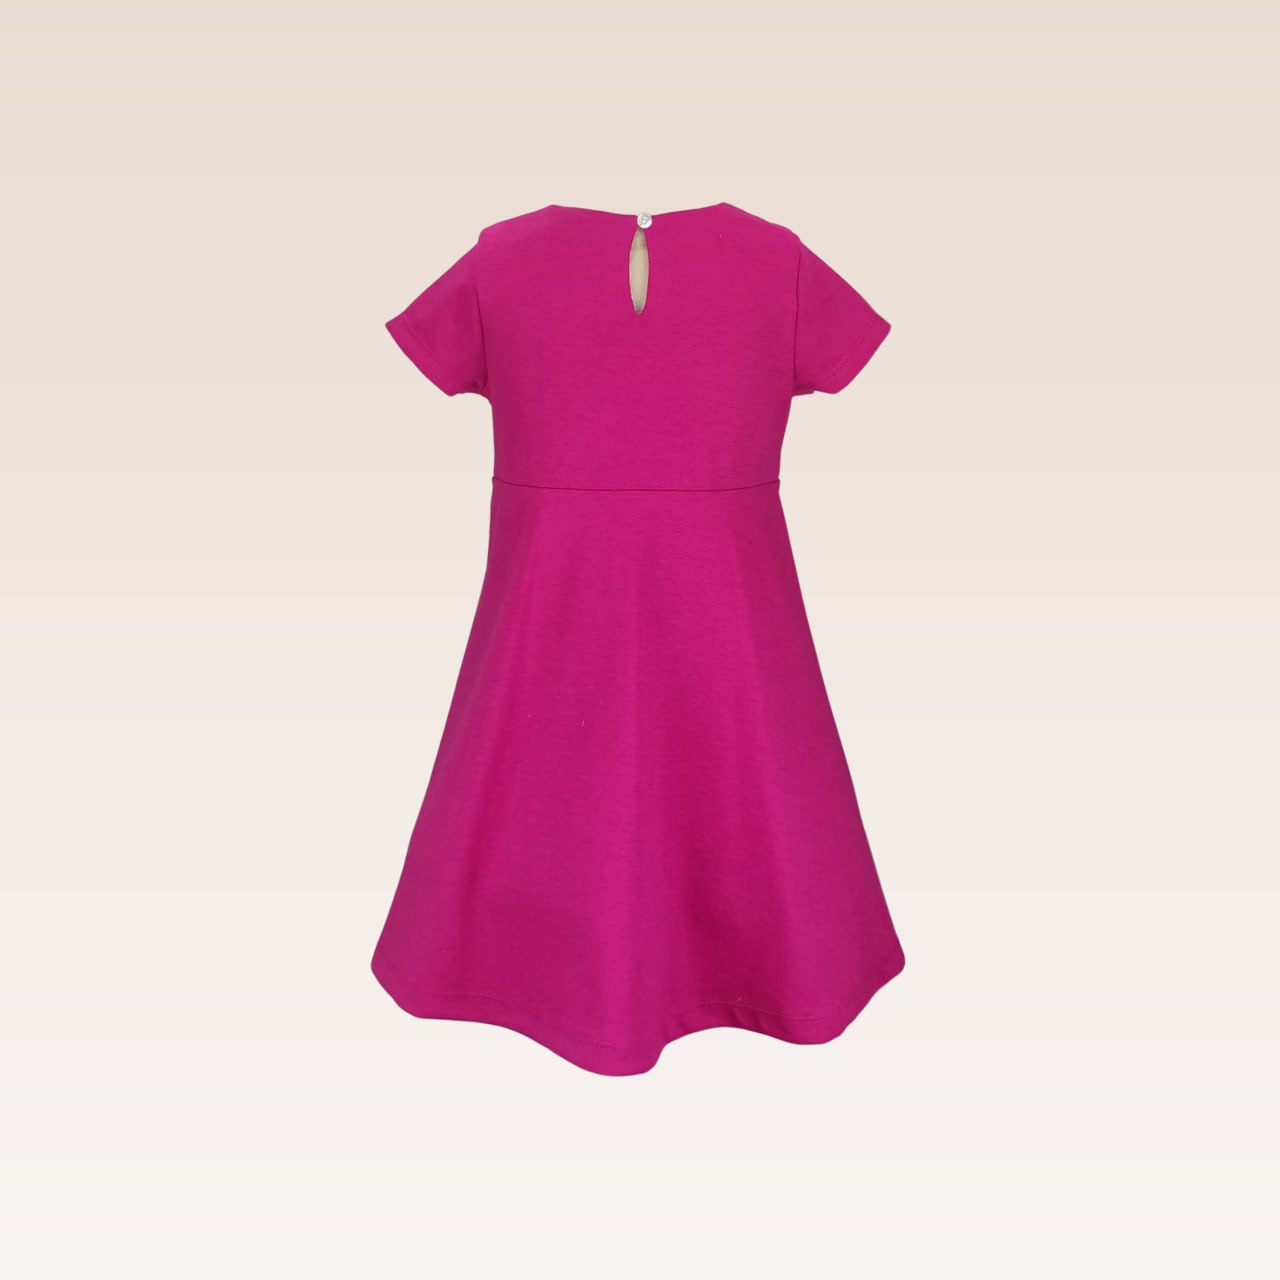 Hannah Girls Fuchsia Dress with Floral Combination